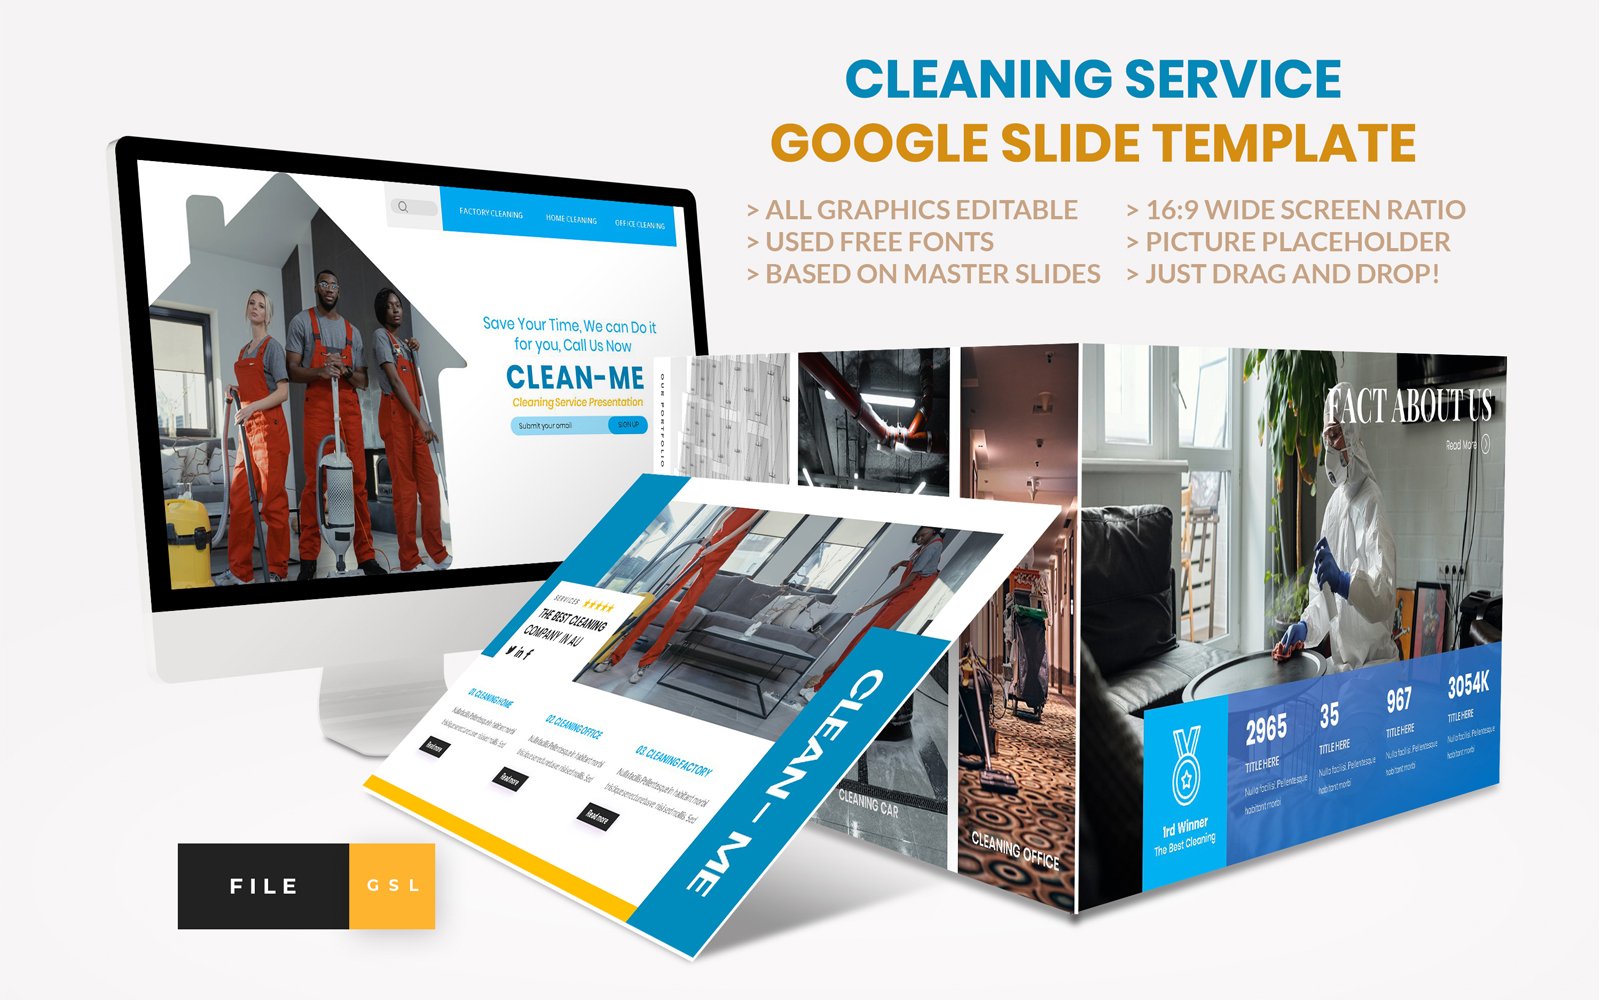 Cleaning Service Google Slide Template